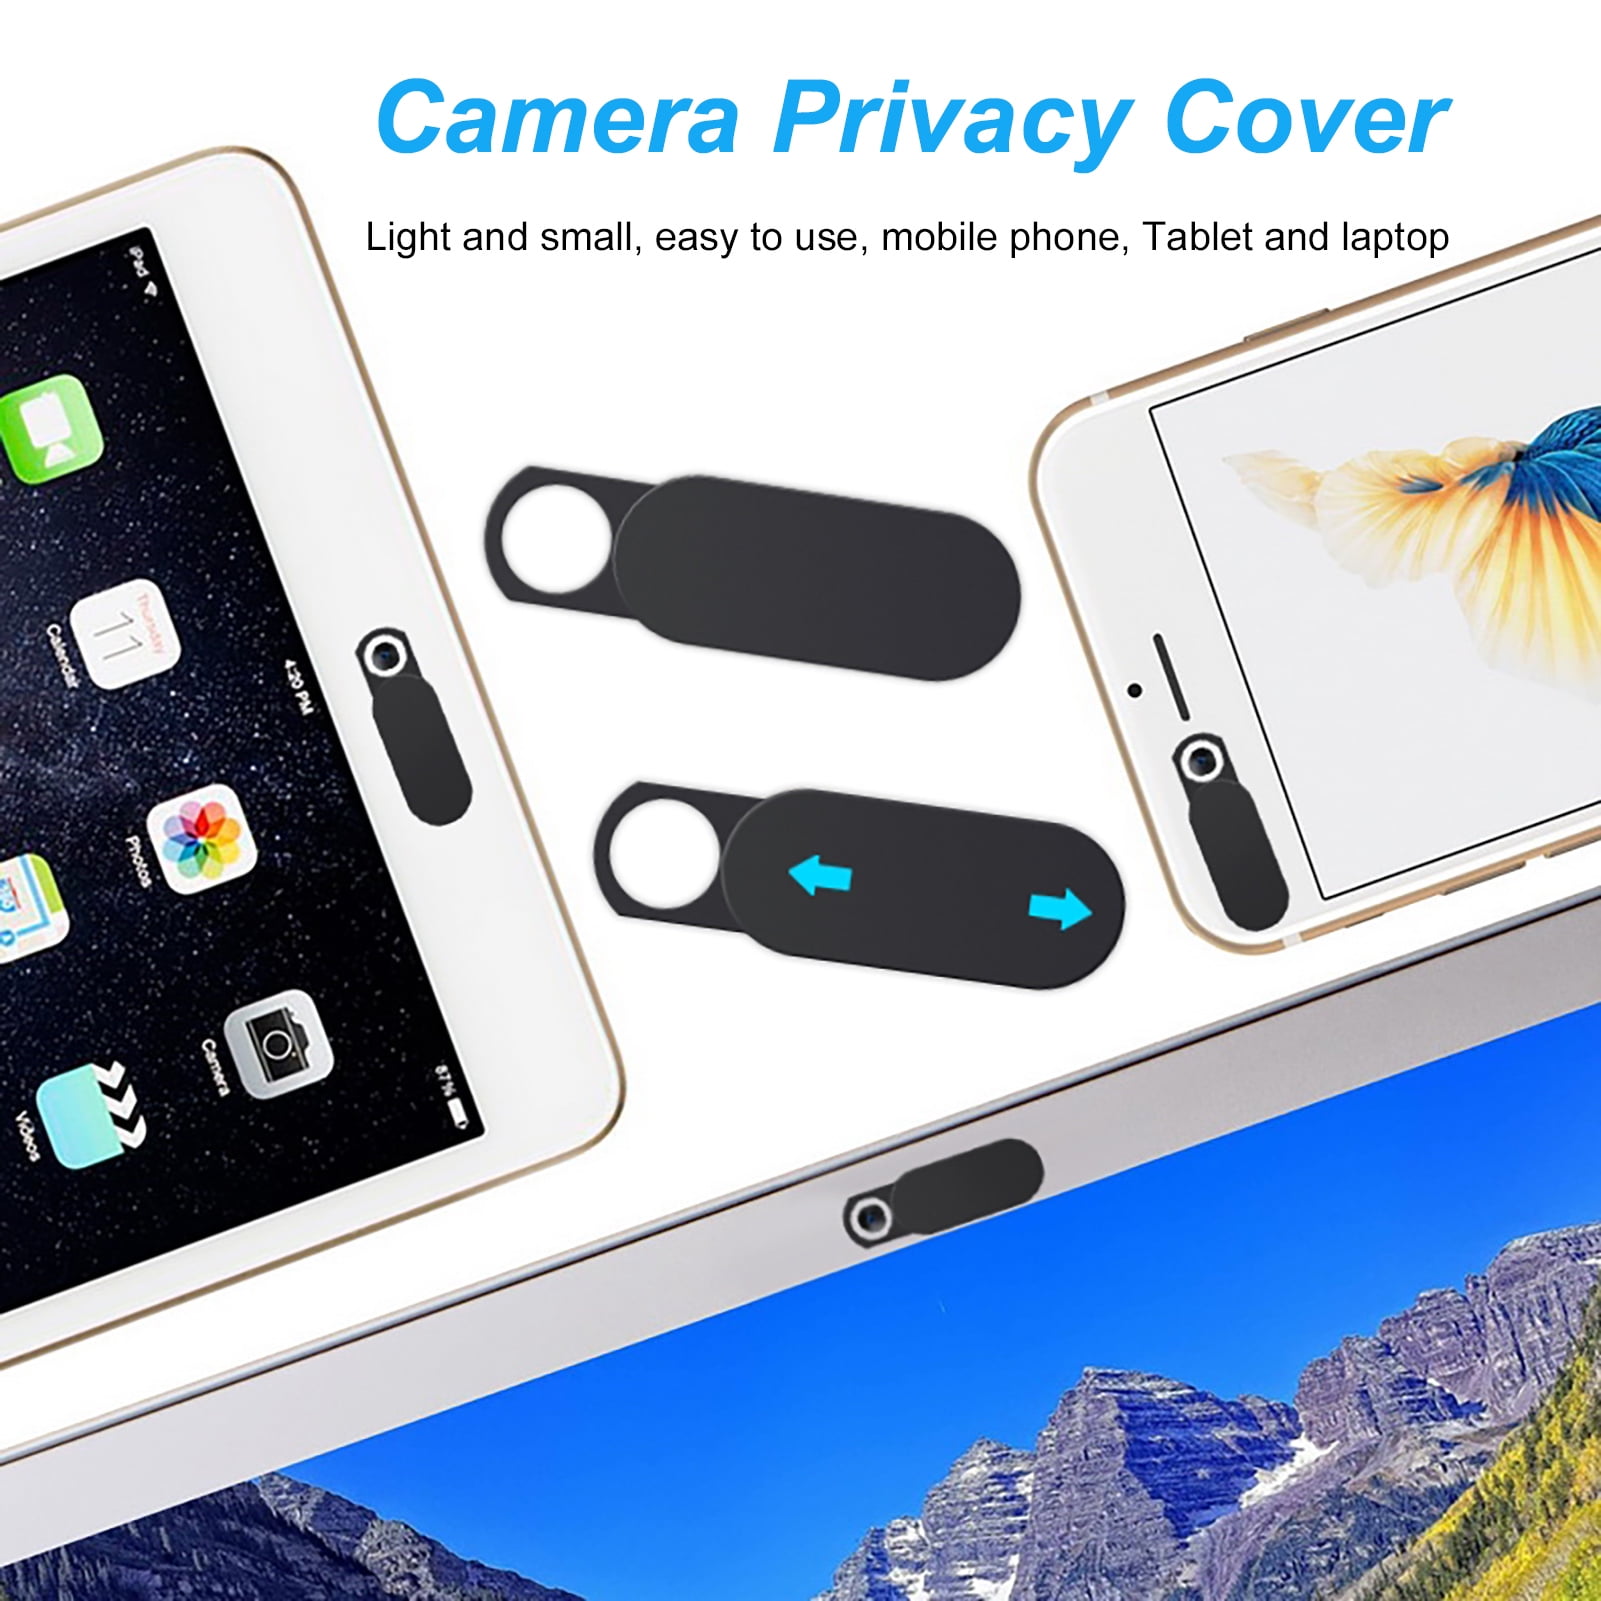 Fashion Webcam Camera Protector Cover Shield Kit For PC Laptop Tablet Smartphone 